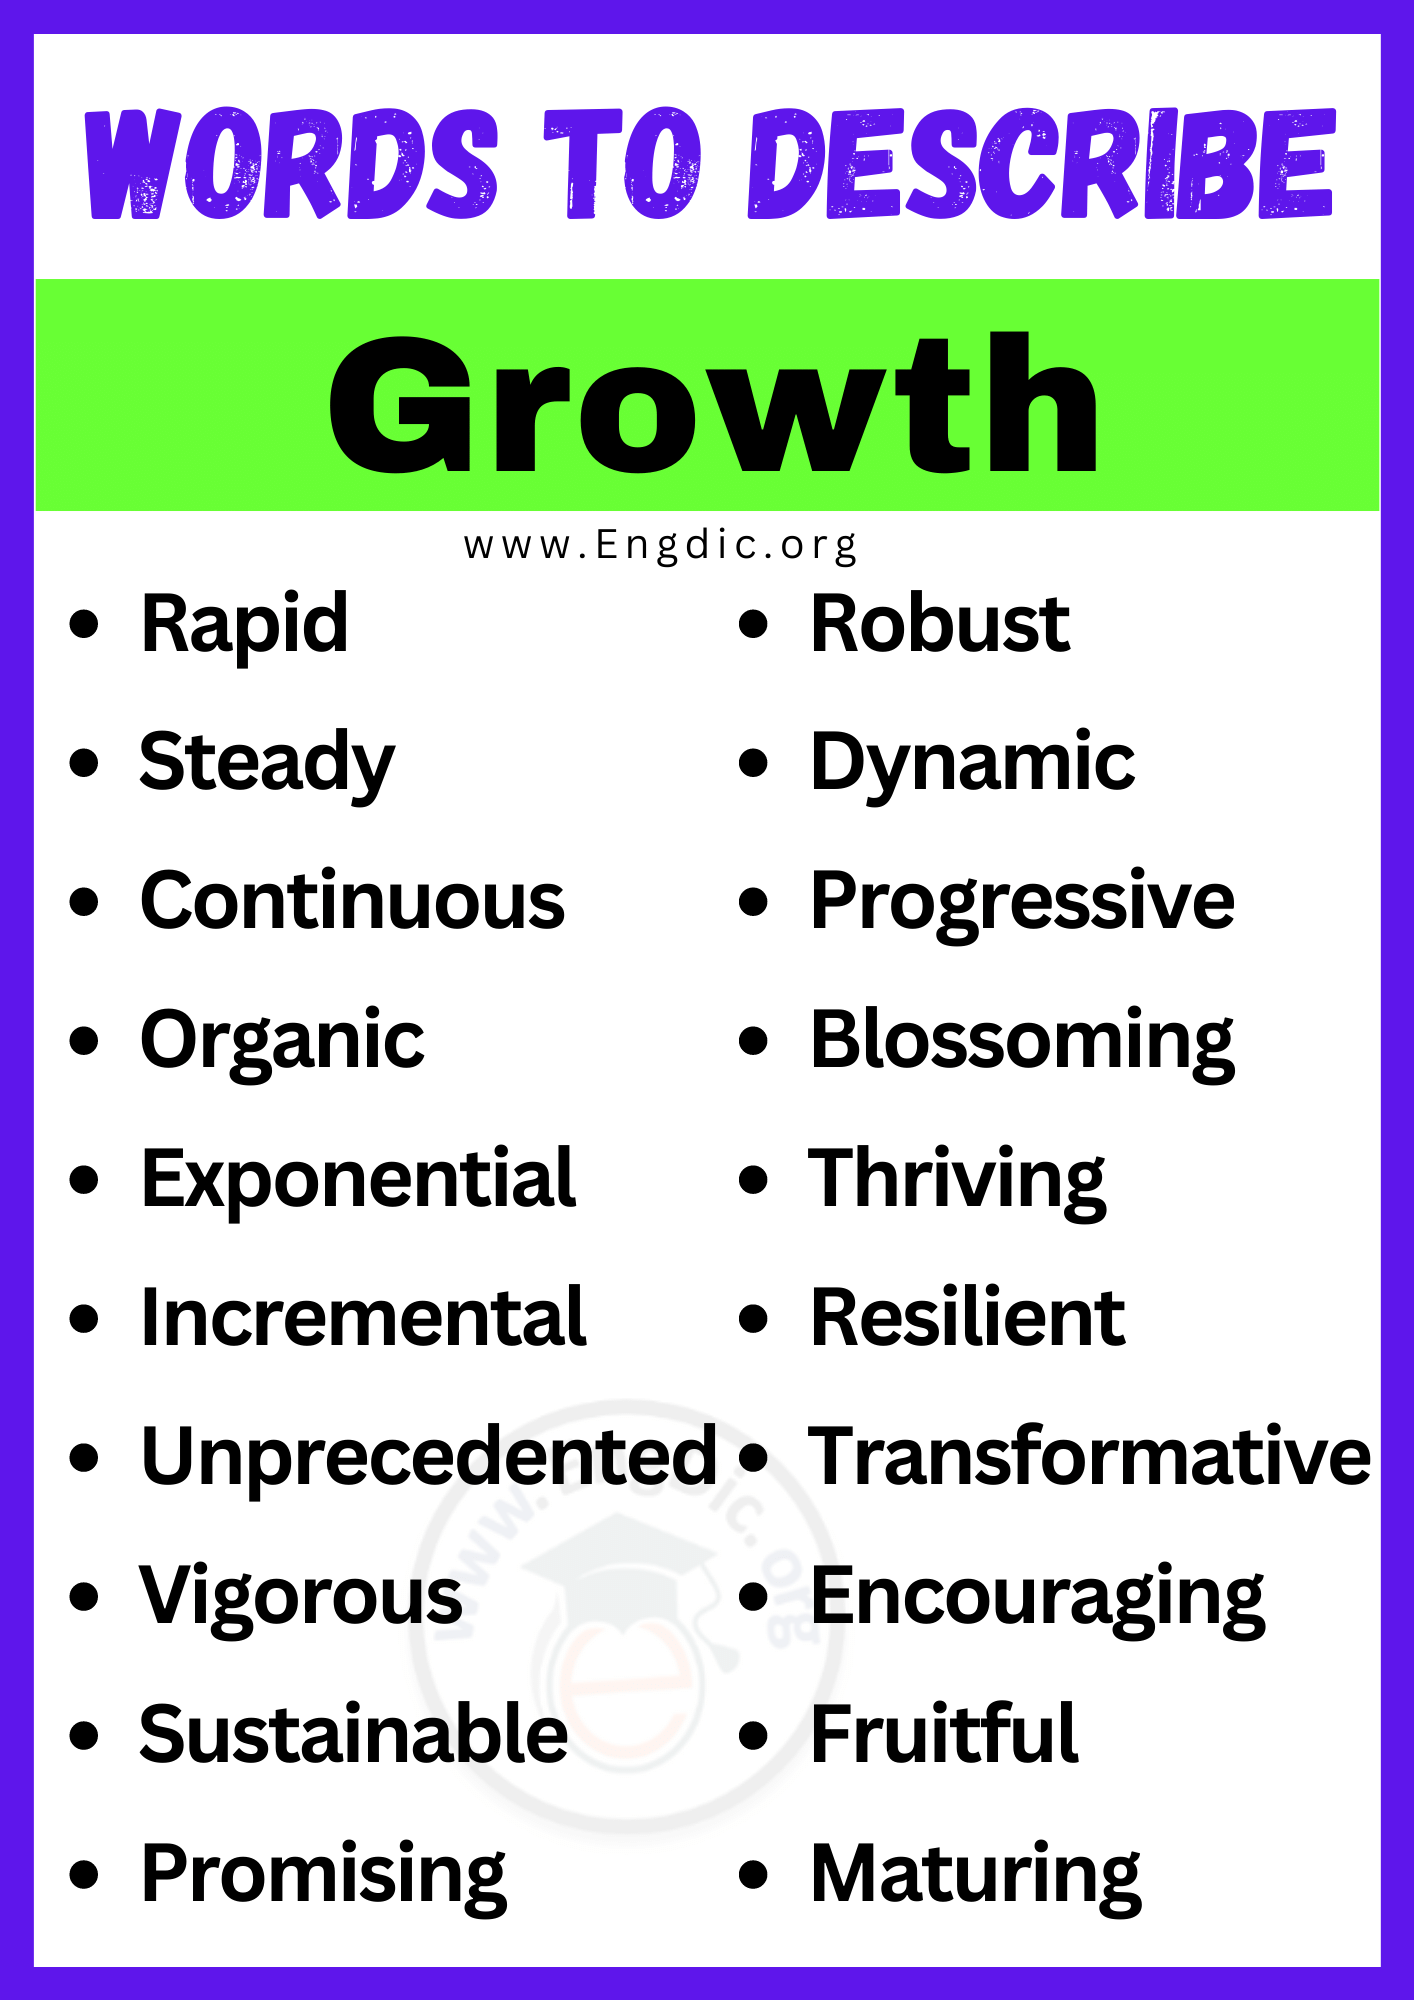 Words to Describe Growth